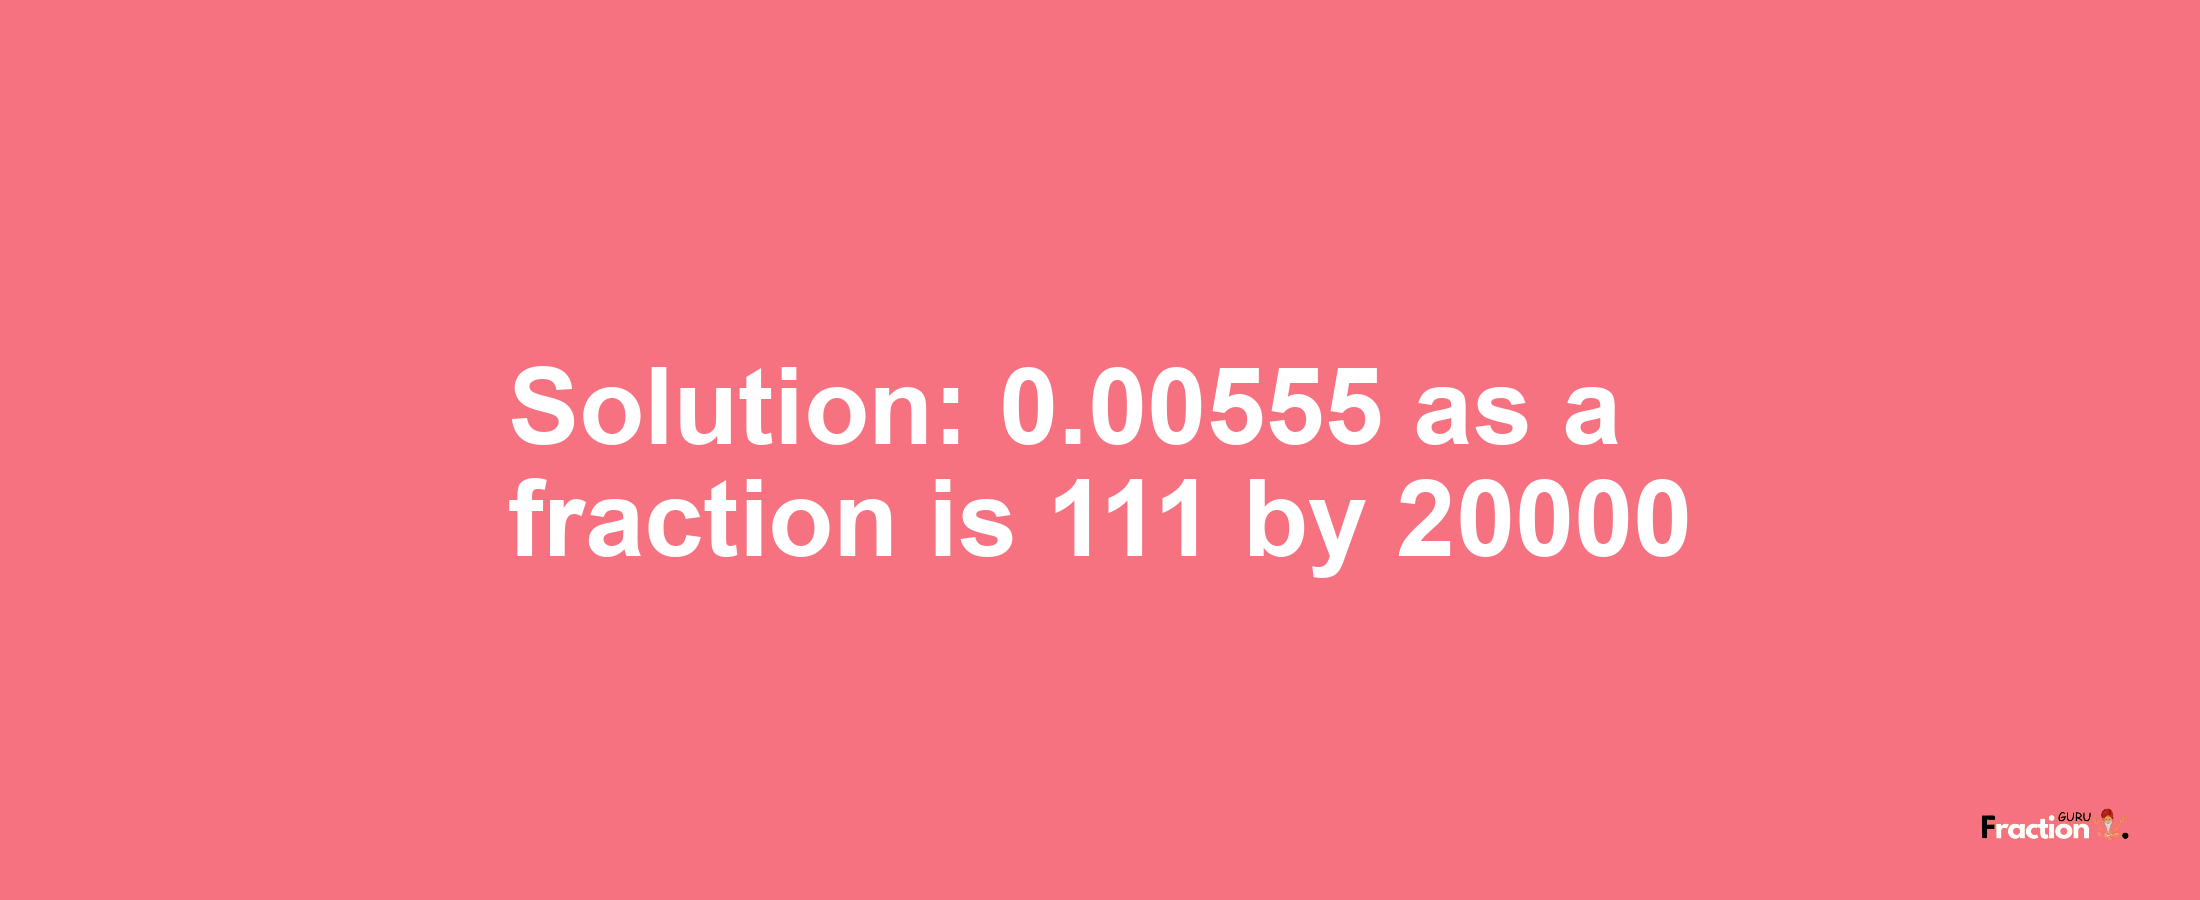 Solution:0.00555 as a fraction is 111/20000